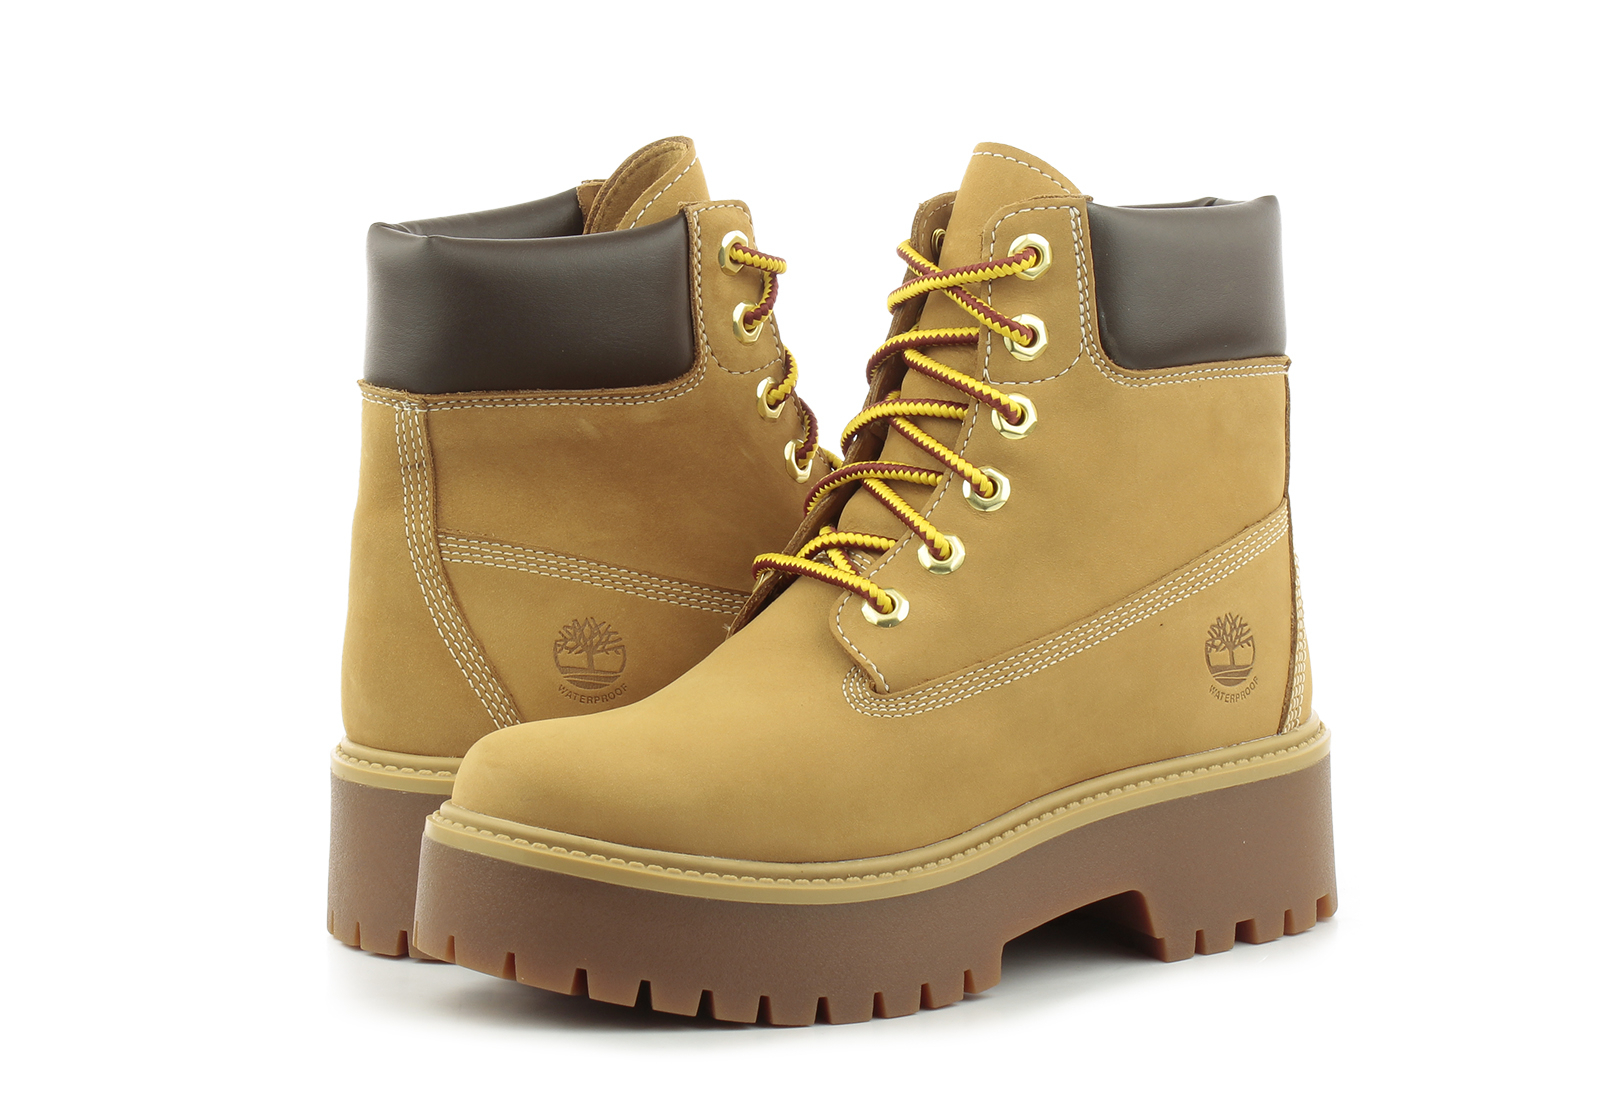 Timberland Lábbelik Elevated 6in Boot